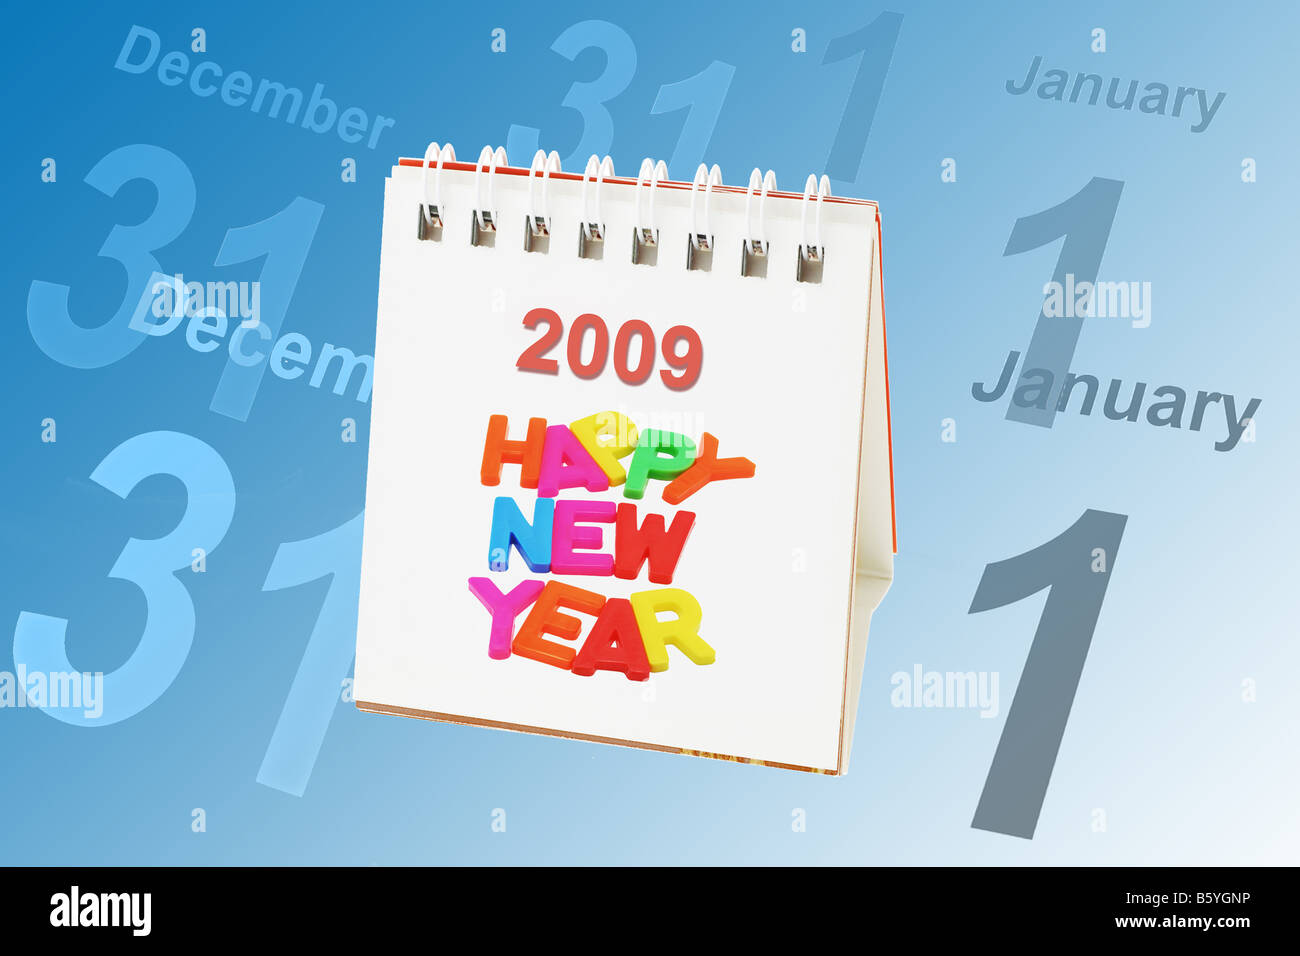 Desktop calendar showing 2009 with dates of Dec 31 and Jan 1 in the background Stock Photo